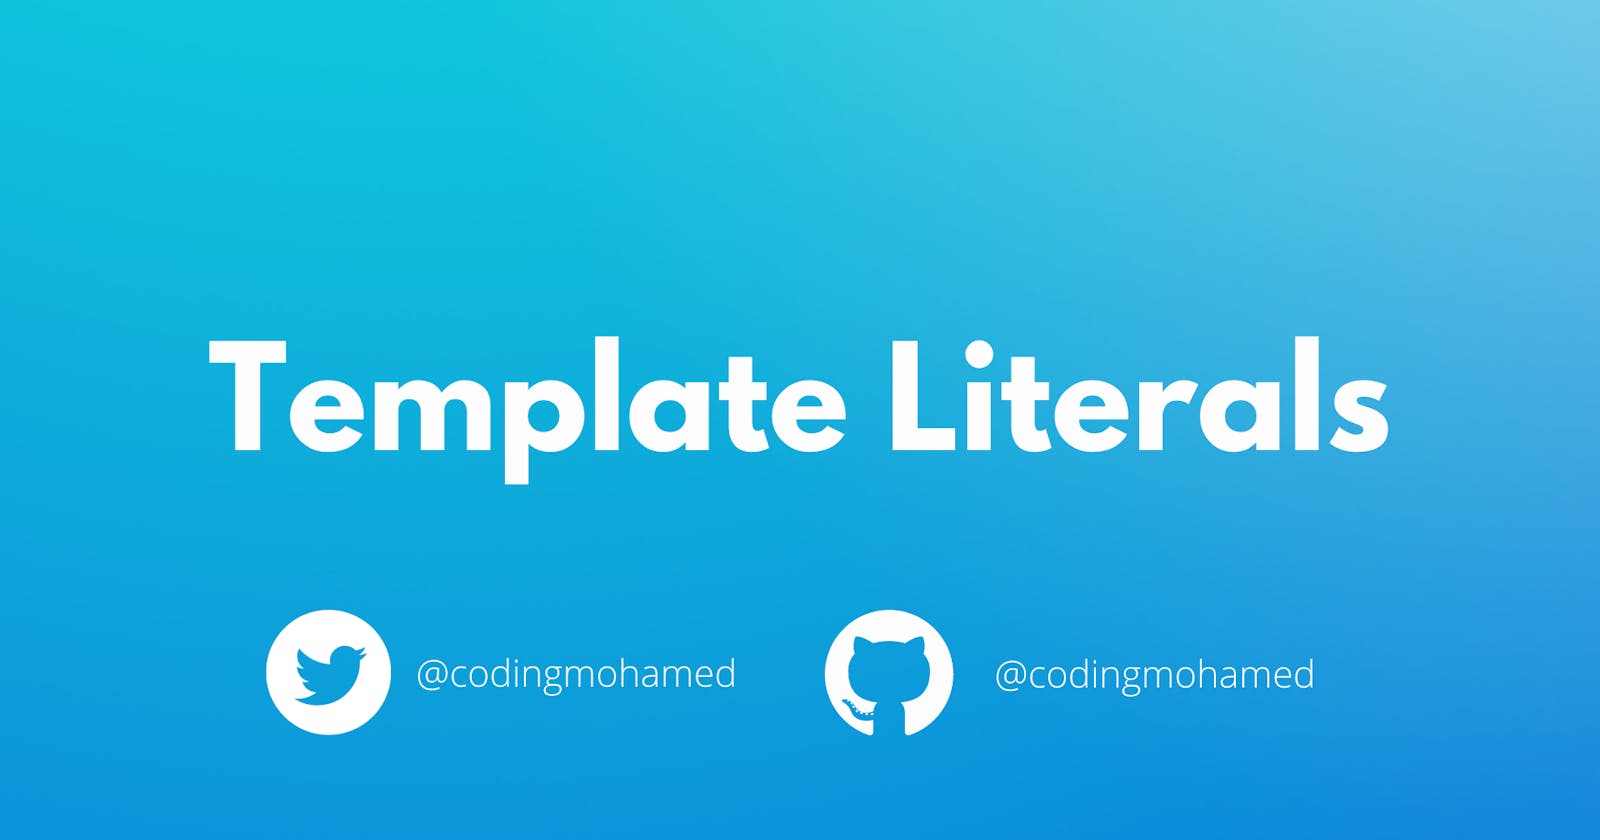 The Benefits of Template Literals